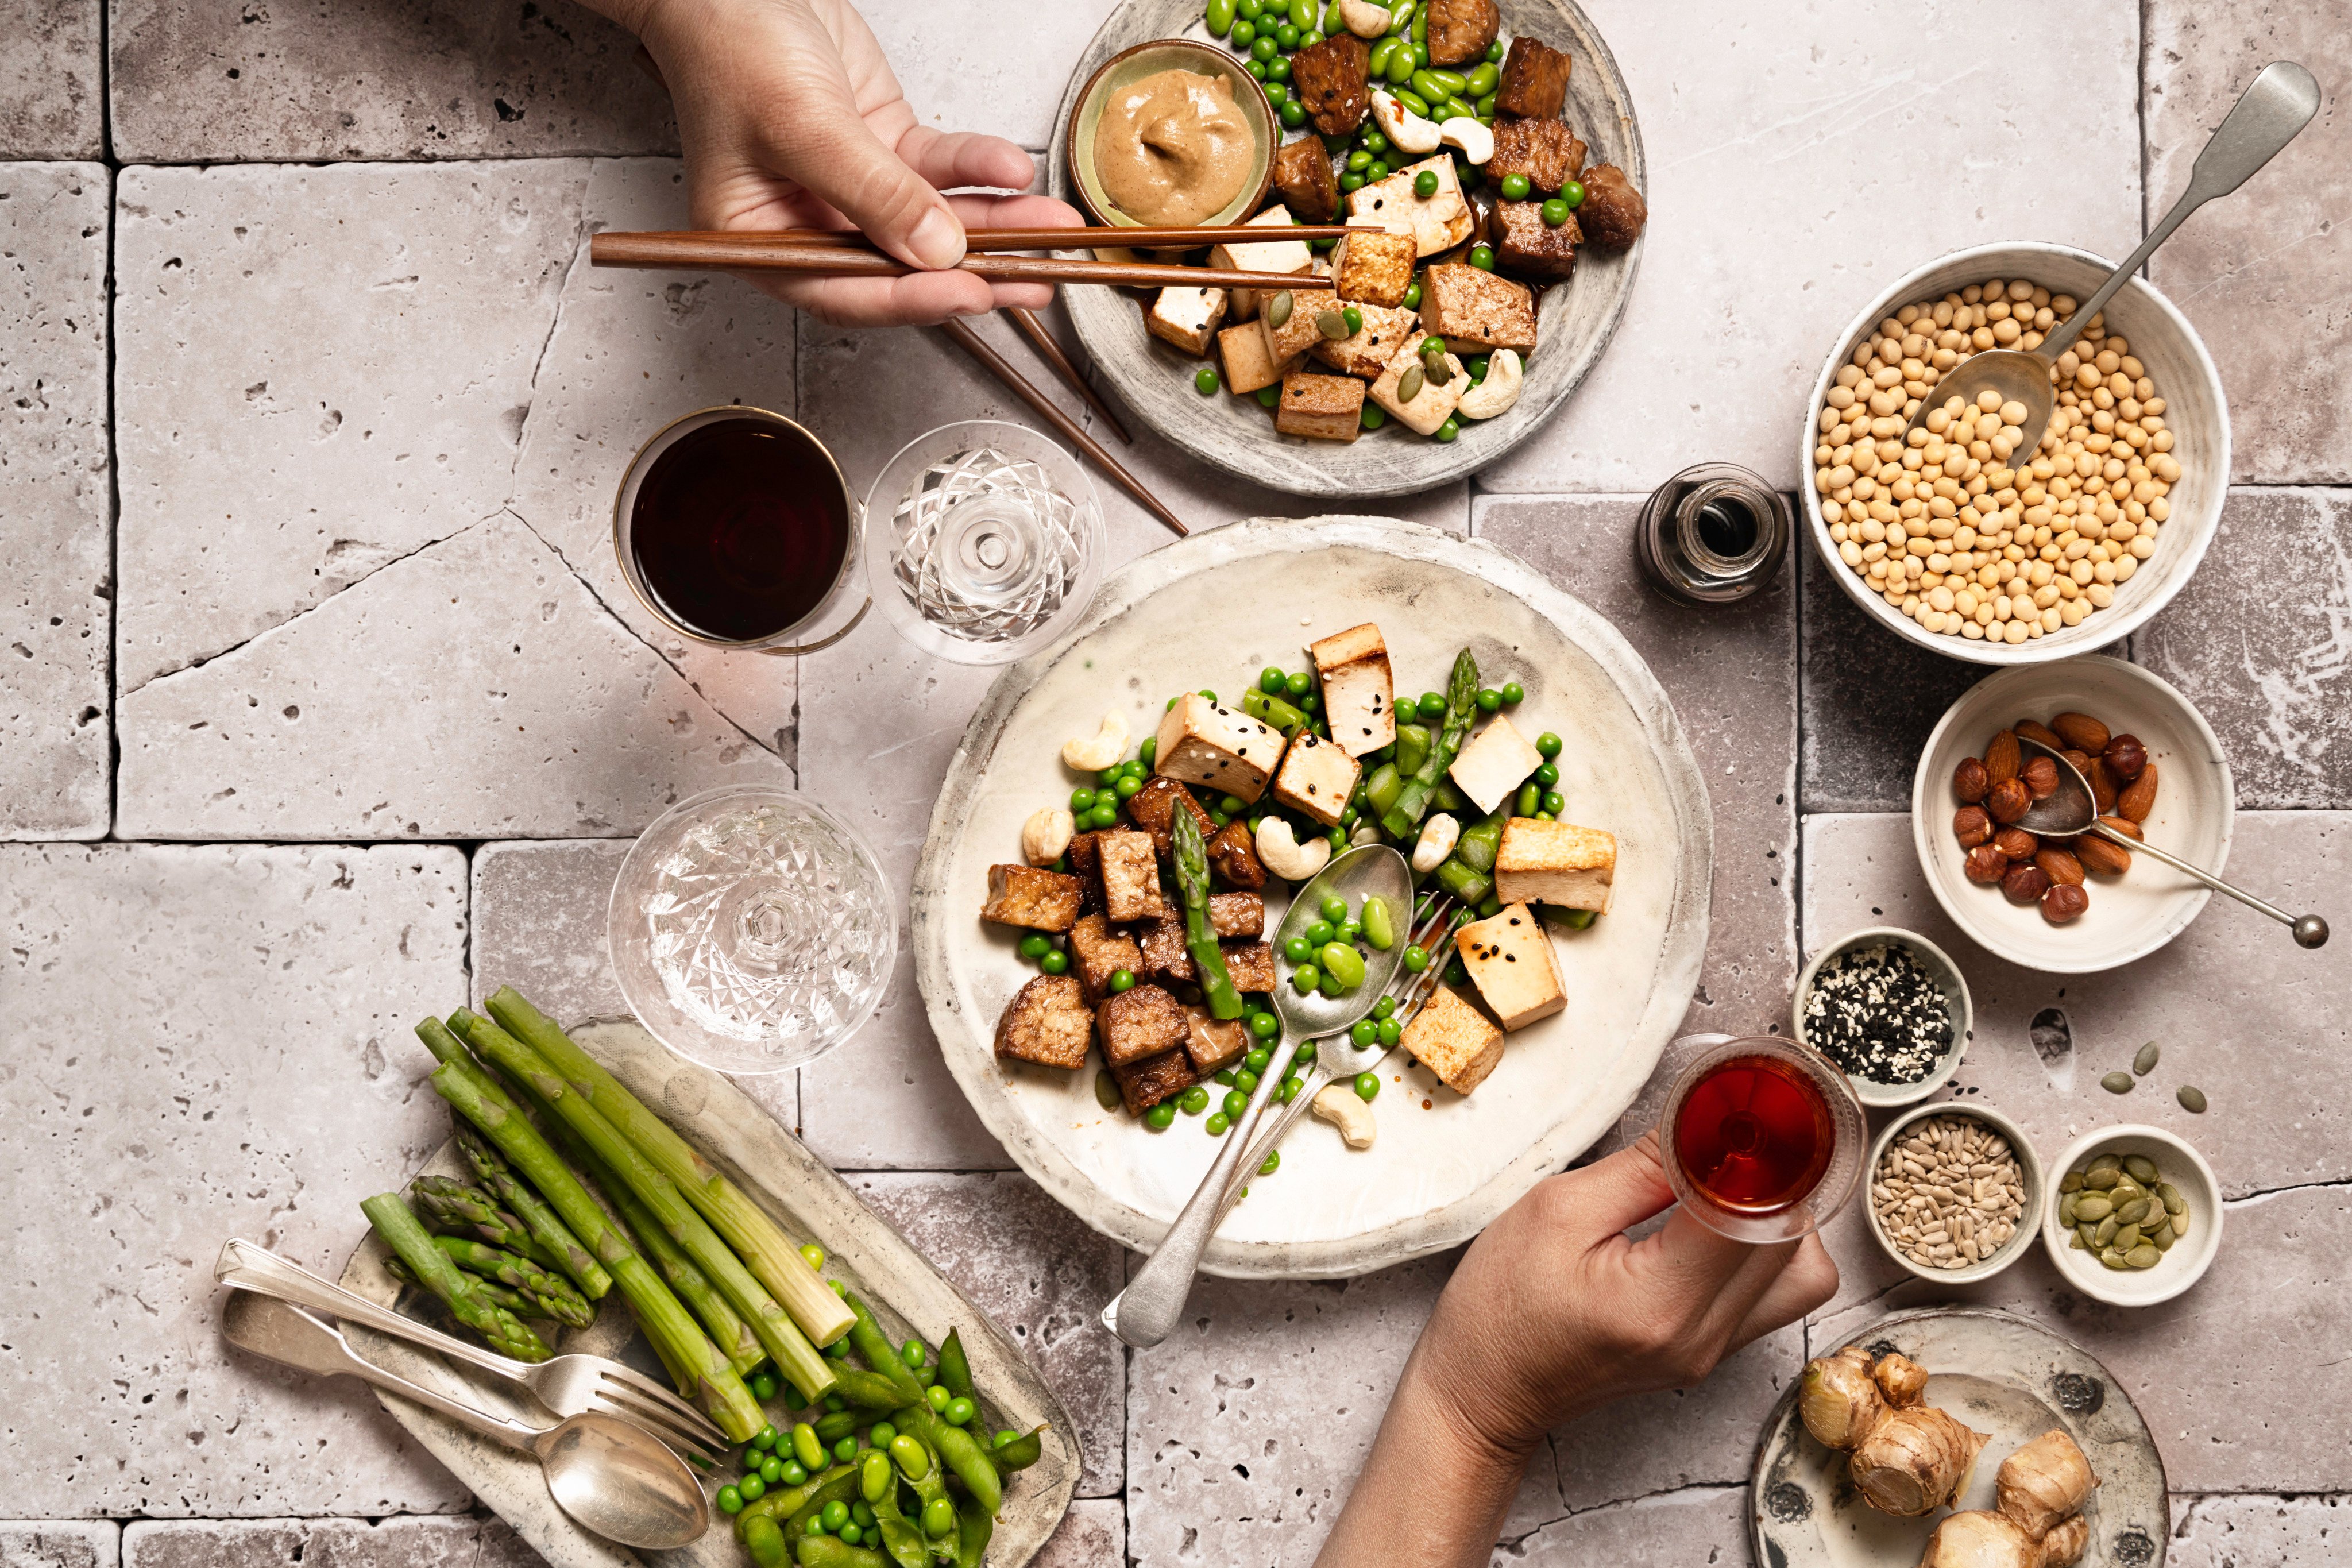 The macrobiotic diet incorporates a variety of whole foods, but why are celebrities sold on it, and does it really work? Photo: Getty Images